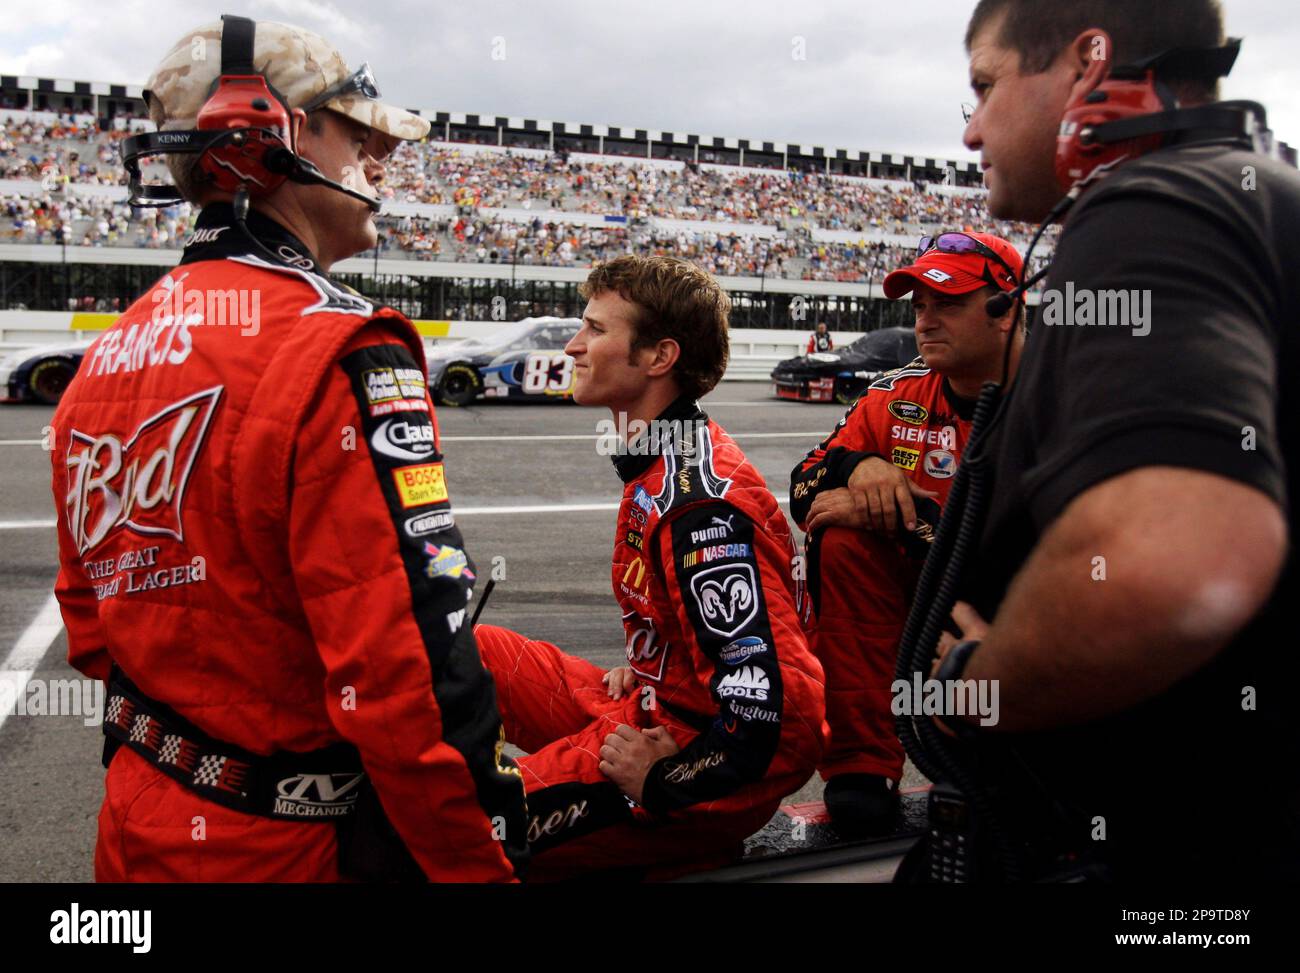 NASCAR driver Kasey Kahne and his crew sit on the wall of their pit during a red flag because of rain during the NASCAR Sprint Cup Series Pennsylvania 500 auto race at